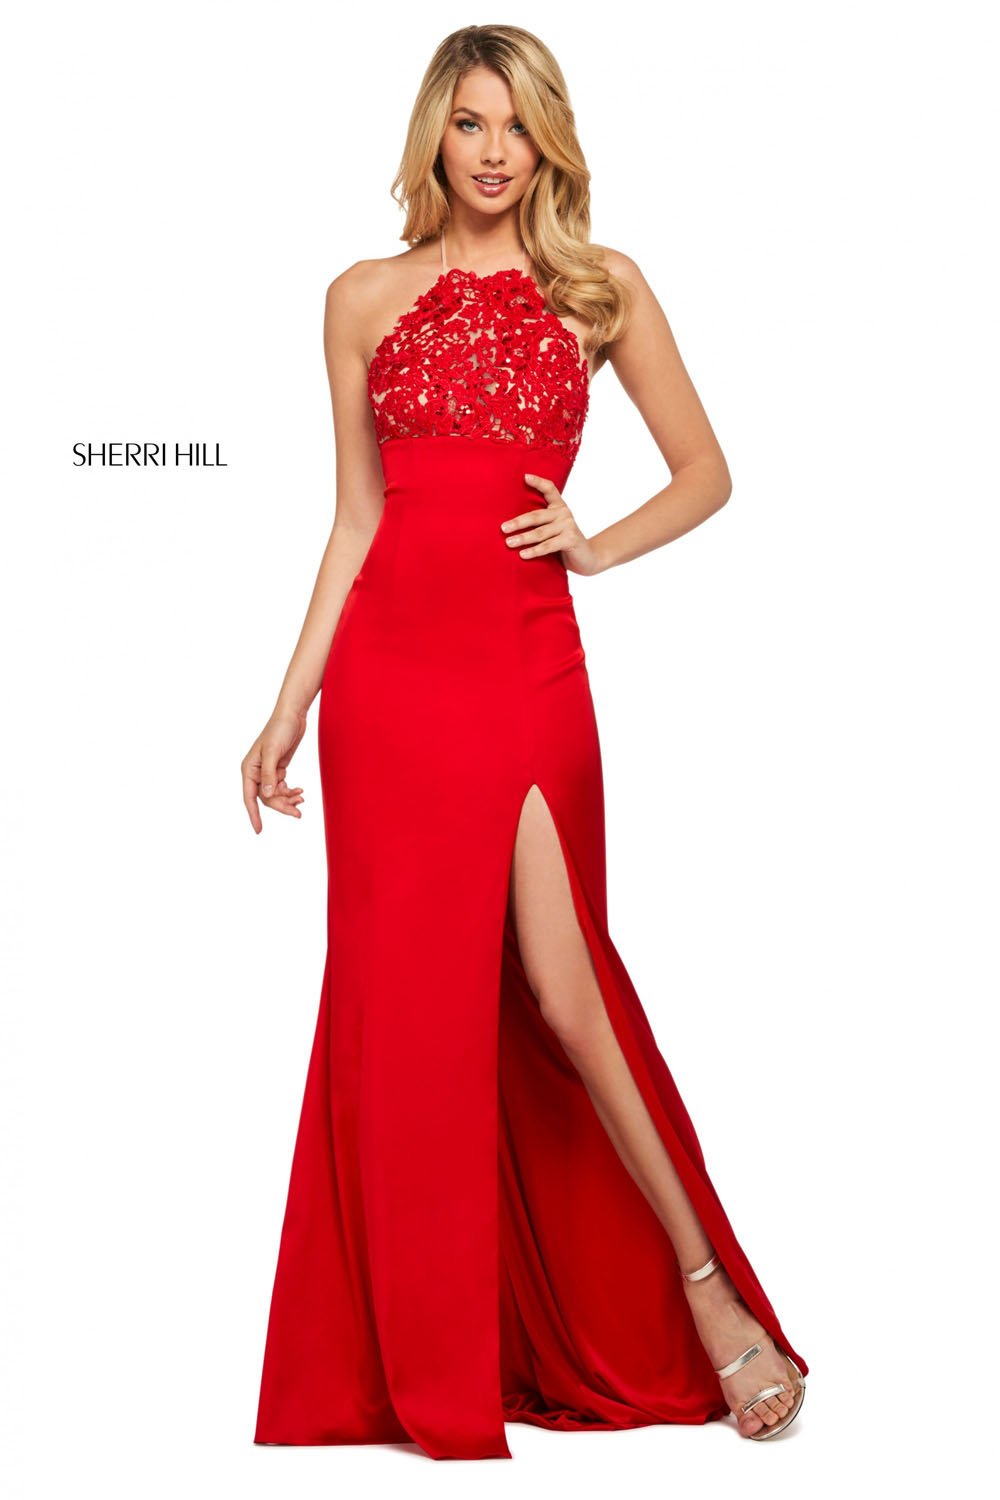 Sherri Hill 53394 dress images in these colors: Black, Rose, Blush, Navy, Ruby, Red, Royal.